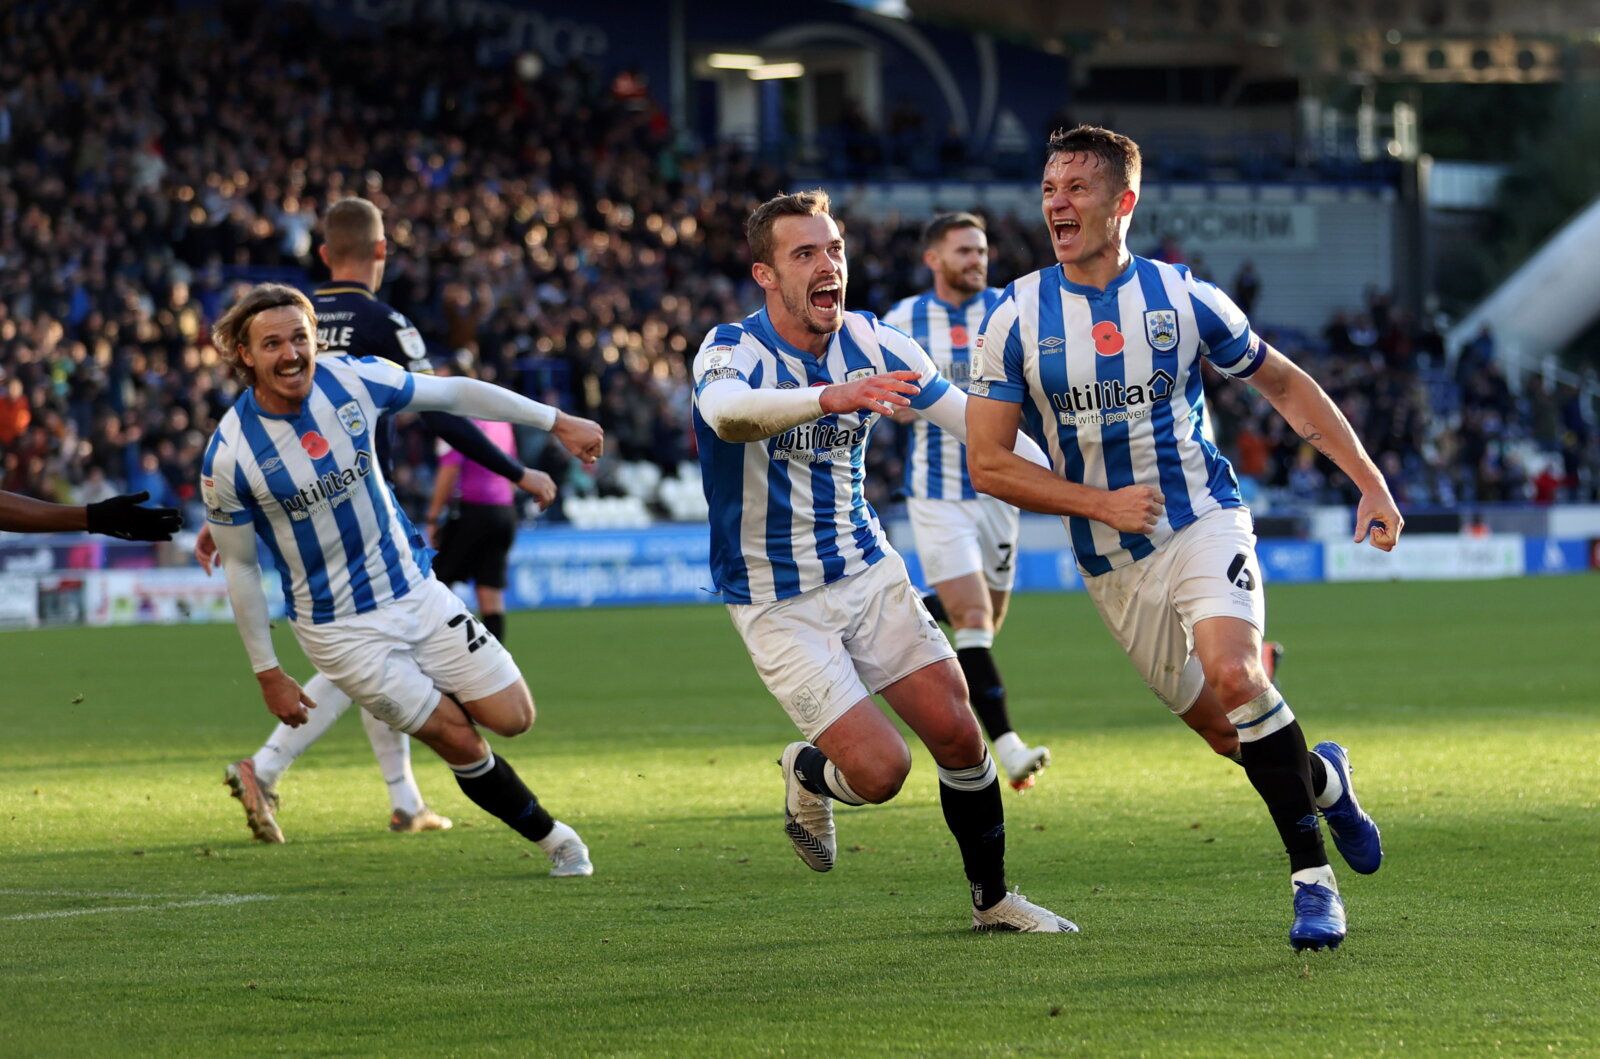 Soccer Football - Championship - Huddersfield Town v Millwall - John Smith's Stadium, Huddersfield, Britain - October 30, 2021 Huddersfield Town's Jonathan Hogg celebrates scoring their first goal with teammates  Action Images/John Clifton  EDITORIAL USE ONLY. No use with unauthorized audio, video, data, fixture lists, club/league logos or 